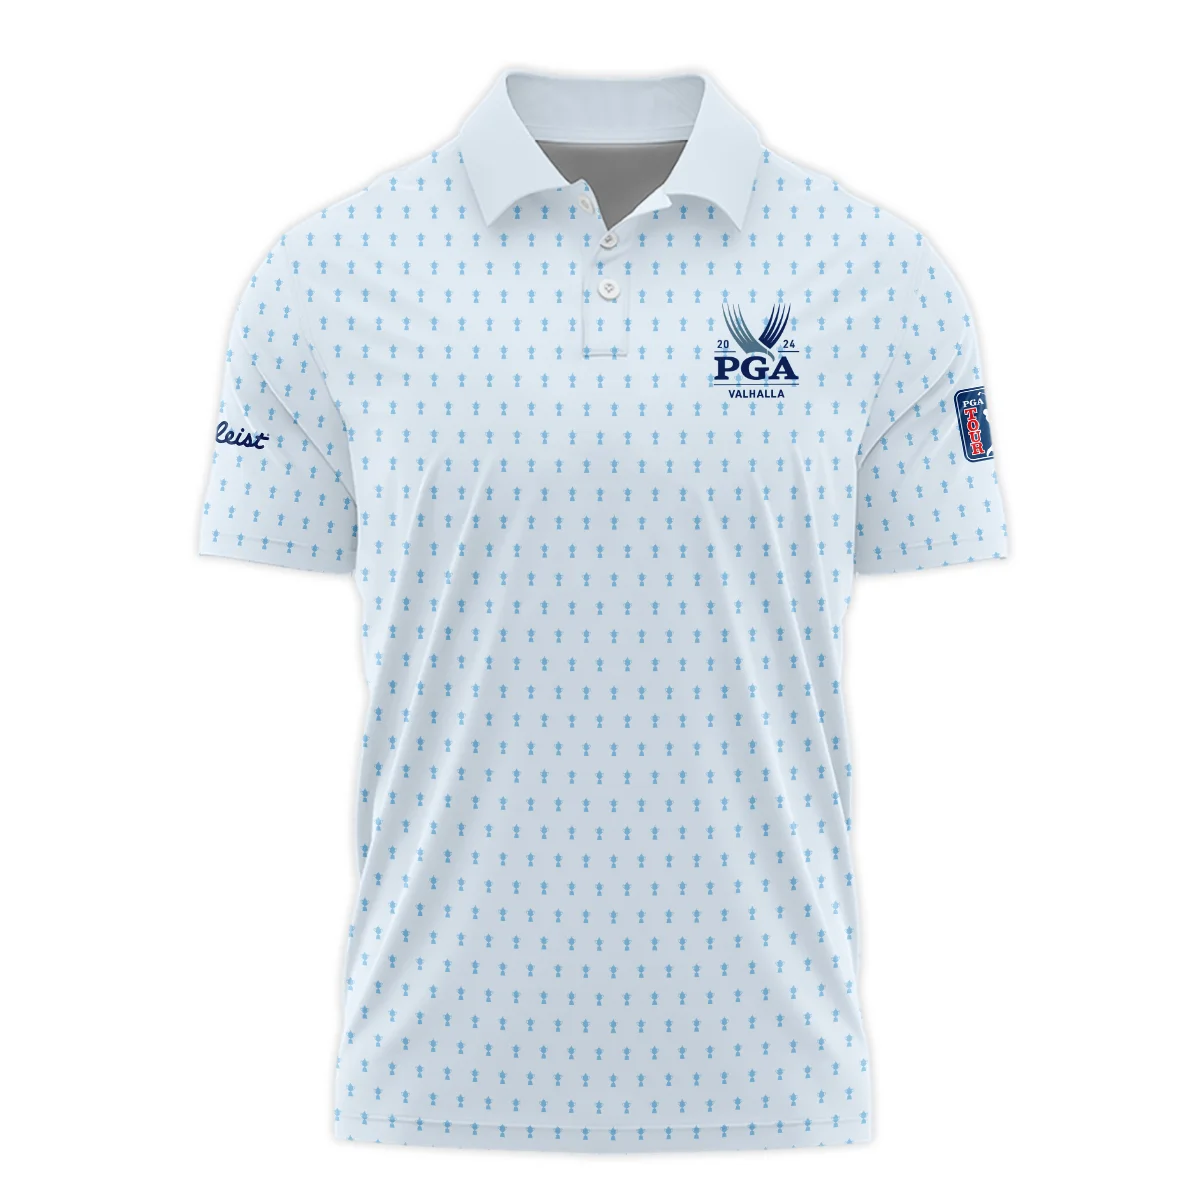 Golf Pattern Light Blue Cup 2024 PGA Championship Valhalla Titleist Polo Shirt Style Classic Polo Shirt For Men